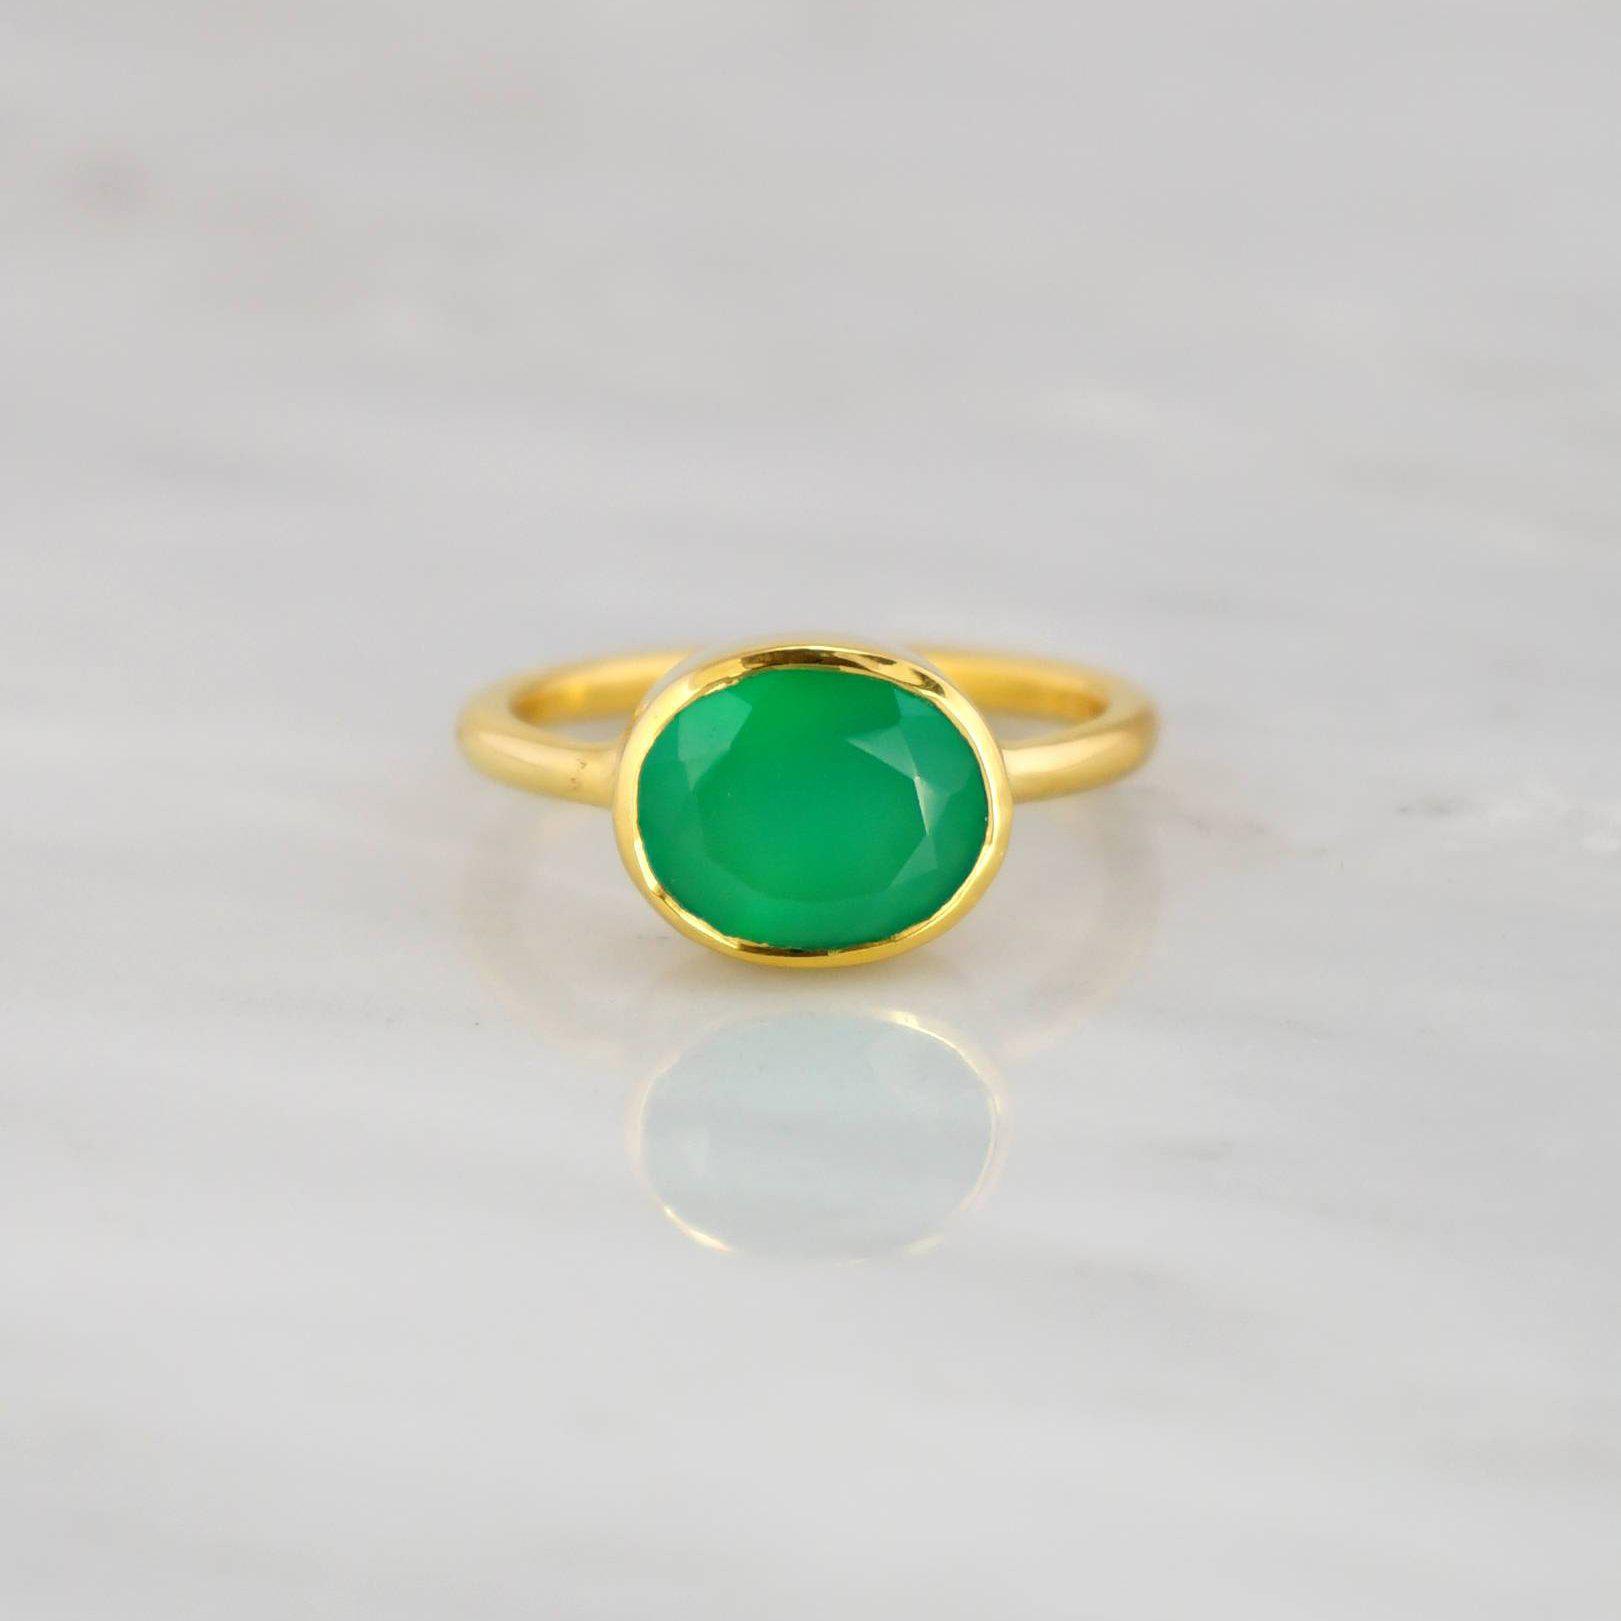 Buy EMERALD RINGS for Women, GREEN Gold Ring, Oval Dark Green Crystal Stone,  May Birthstone Jewelry Gifts for Her May Birthstone Gem R4016B Online in  India - Etsy